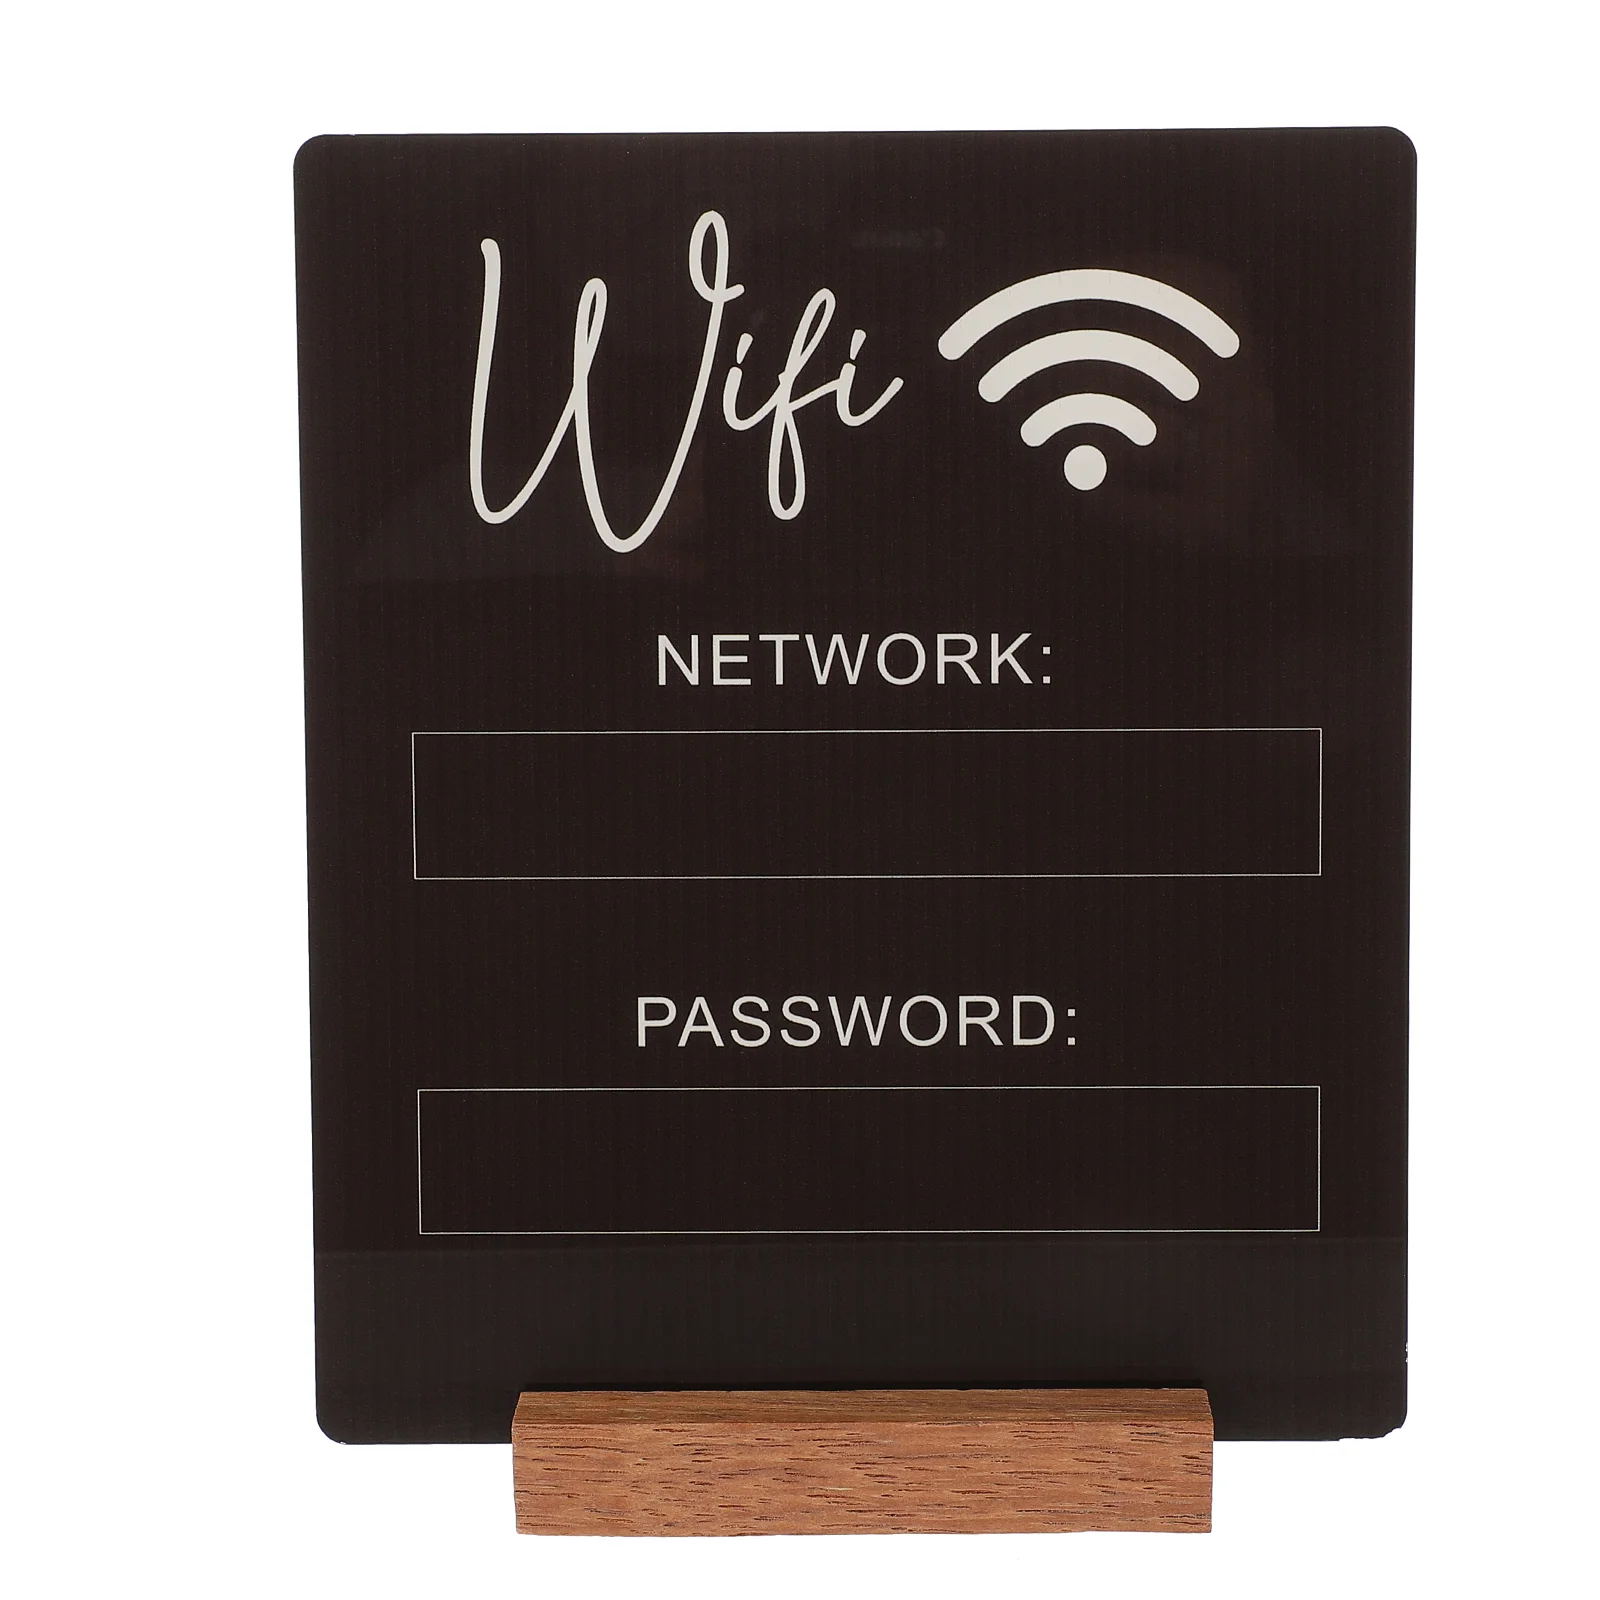 Table Decor Wifi Password Sign for Hotel Wireless Network Guests Acrylic Reminder Stand japan anime jujutsu kaisen acrylic figure stand model plate desk decor cosplay xmas keychain stand sign men s gift stand sign